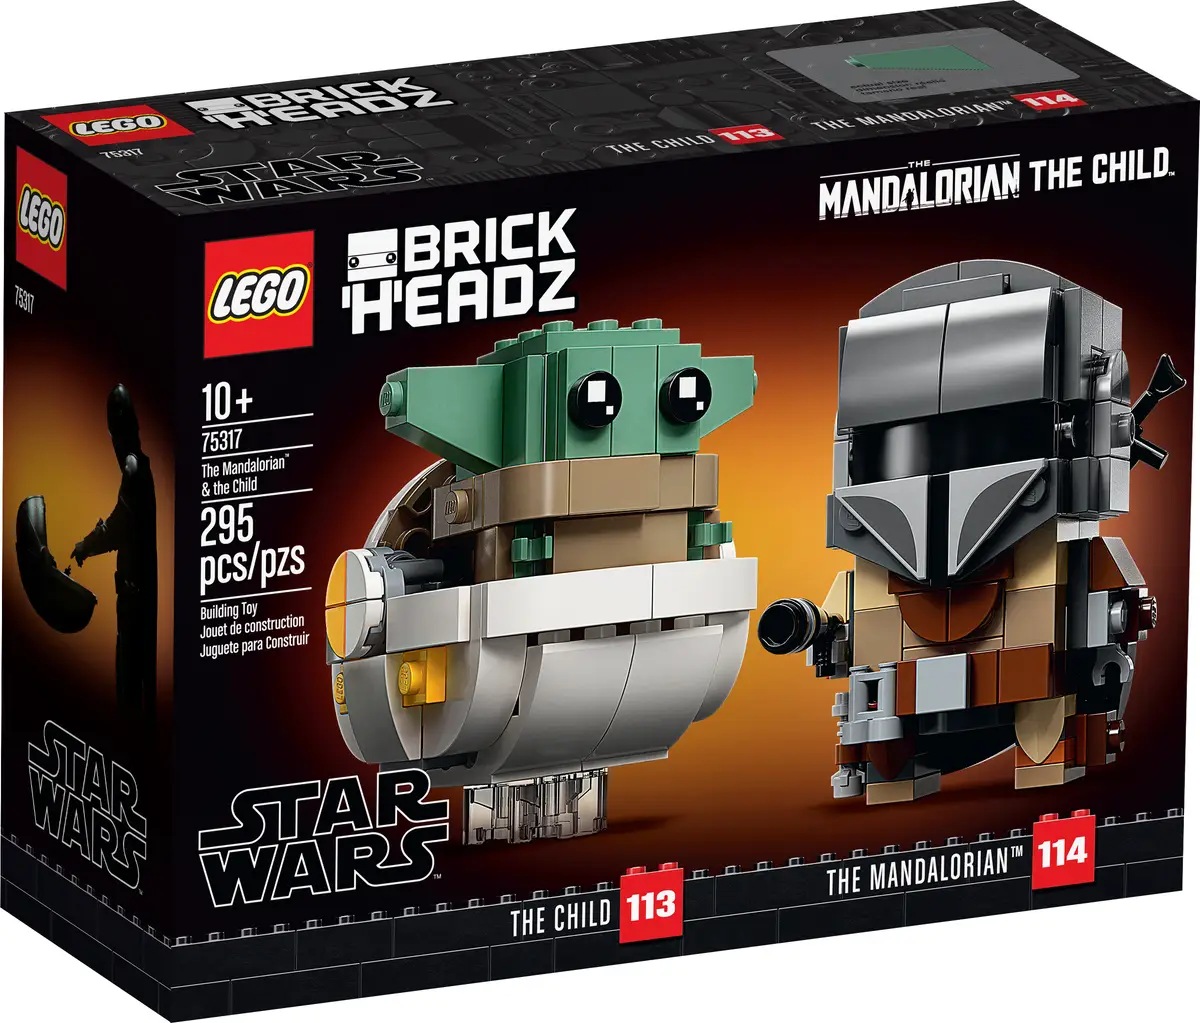 LEGO Star Wars The Mandalorian and The Child